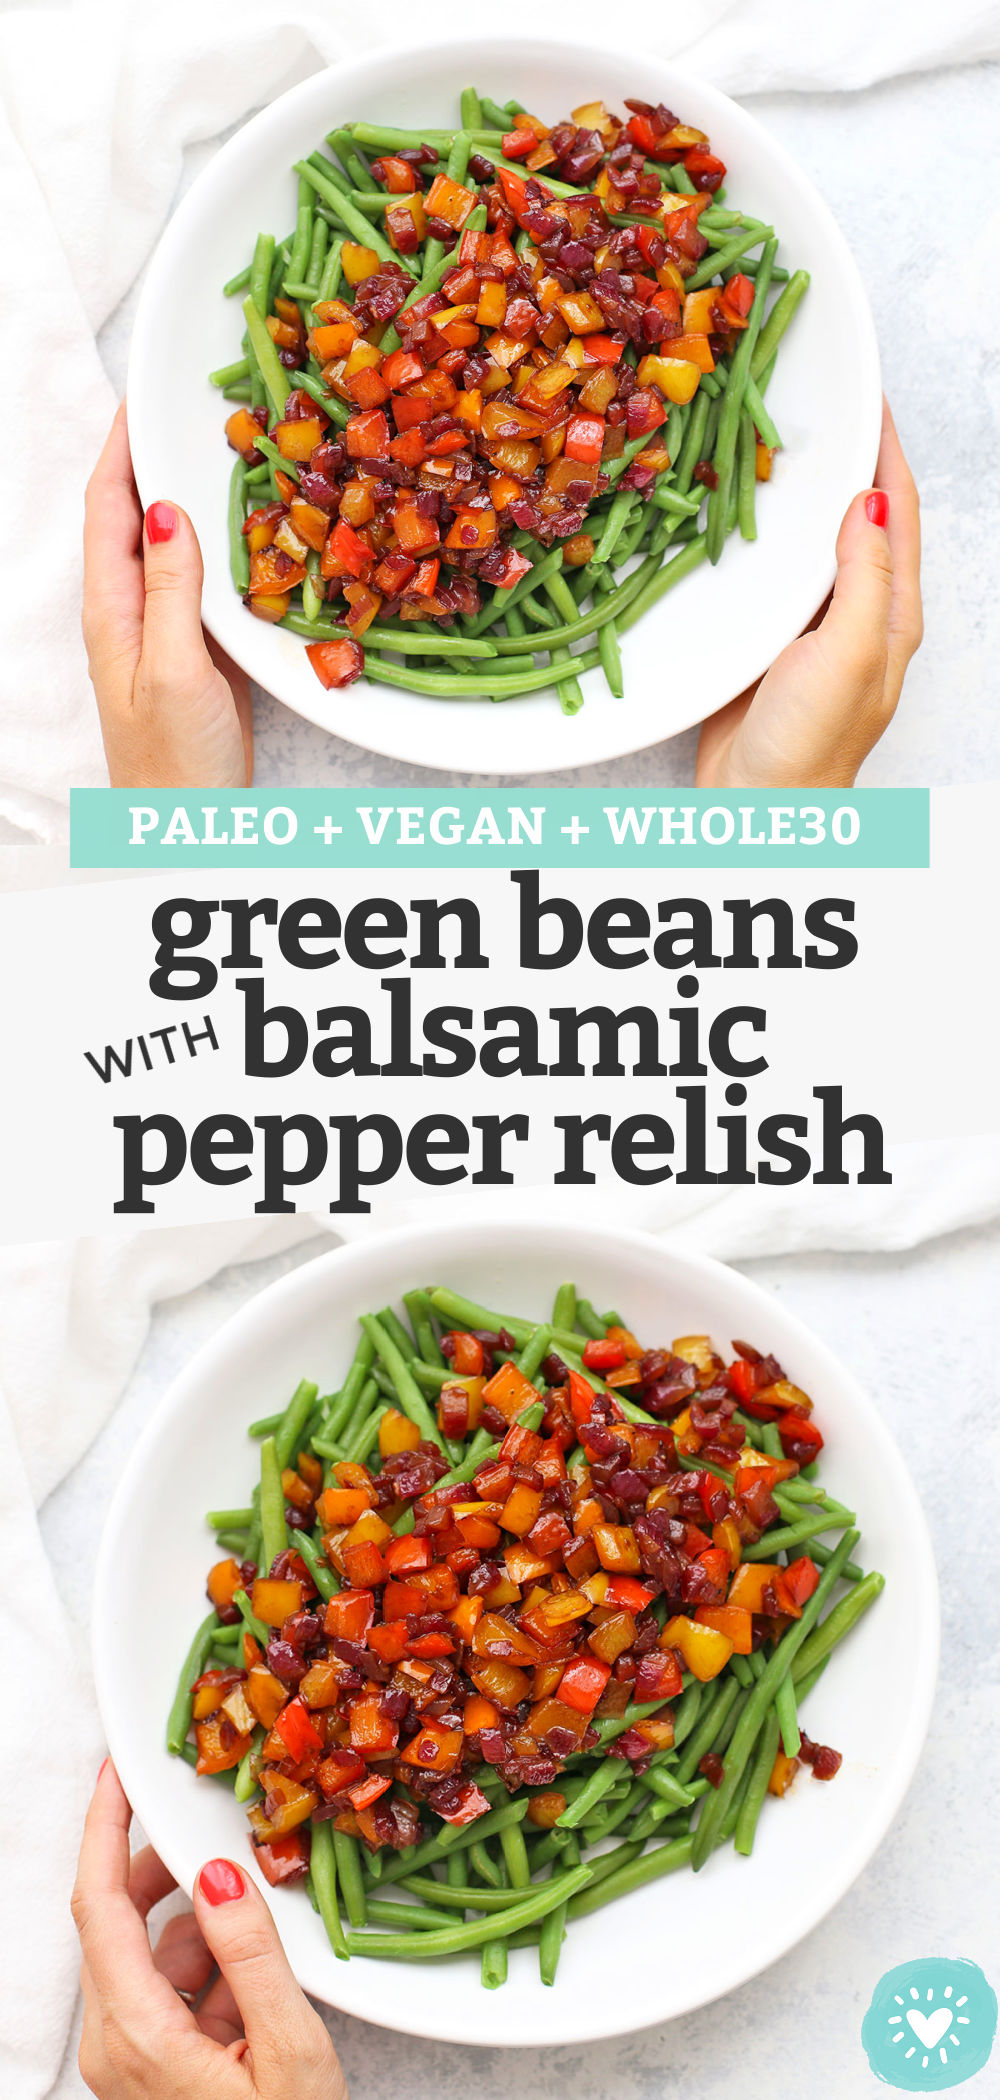 Green Beans with Balsamic Pepper Relish - This bright, beautiful side dish will steal the spotlight at dinner, thanks to the sweet, tangy balsamic bell pepper relish. It's incredible! (Vegan, Paleo & Whole30 approved!) // pepper relish // green beans recipe // balsamic green beans // green beans with bell peppers // gluten free // dairy free // vegetarian